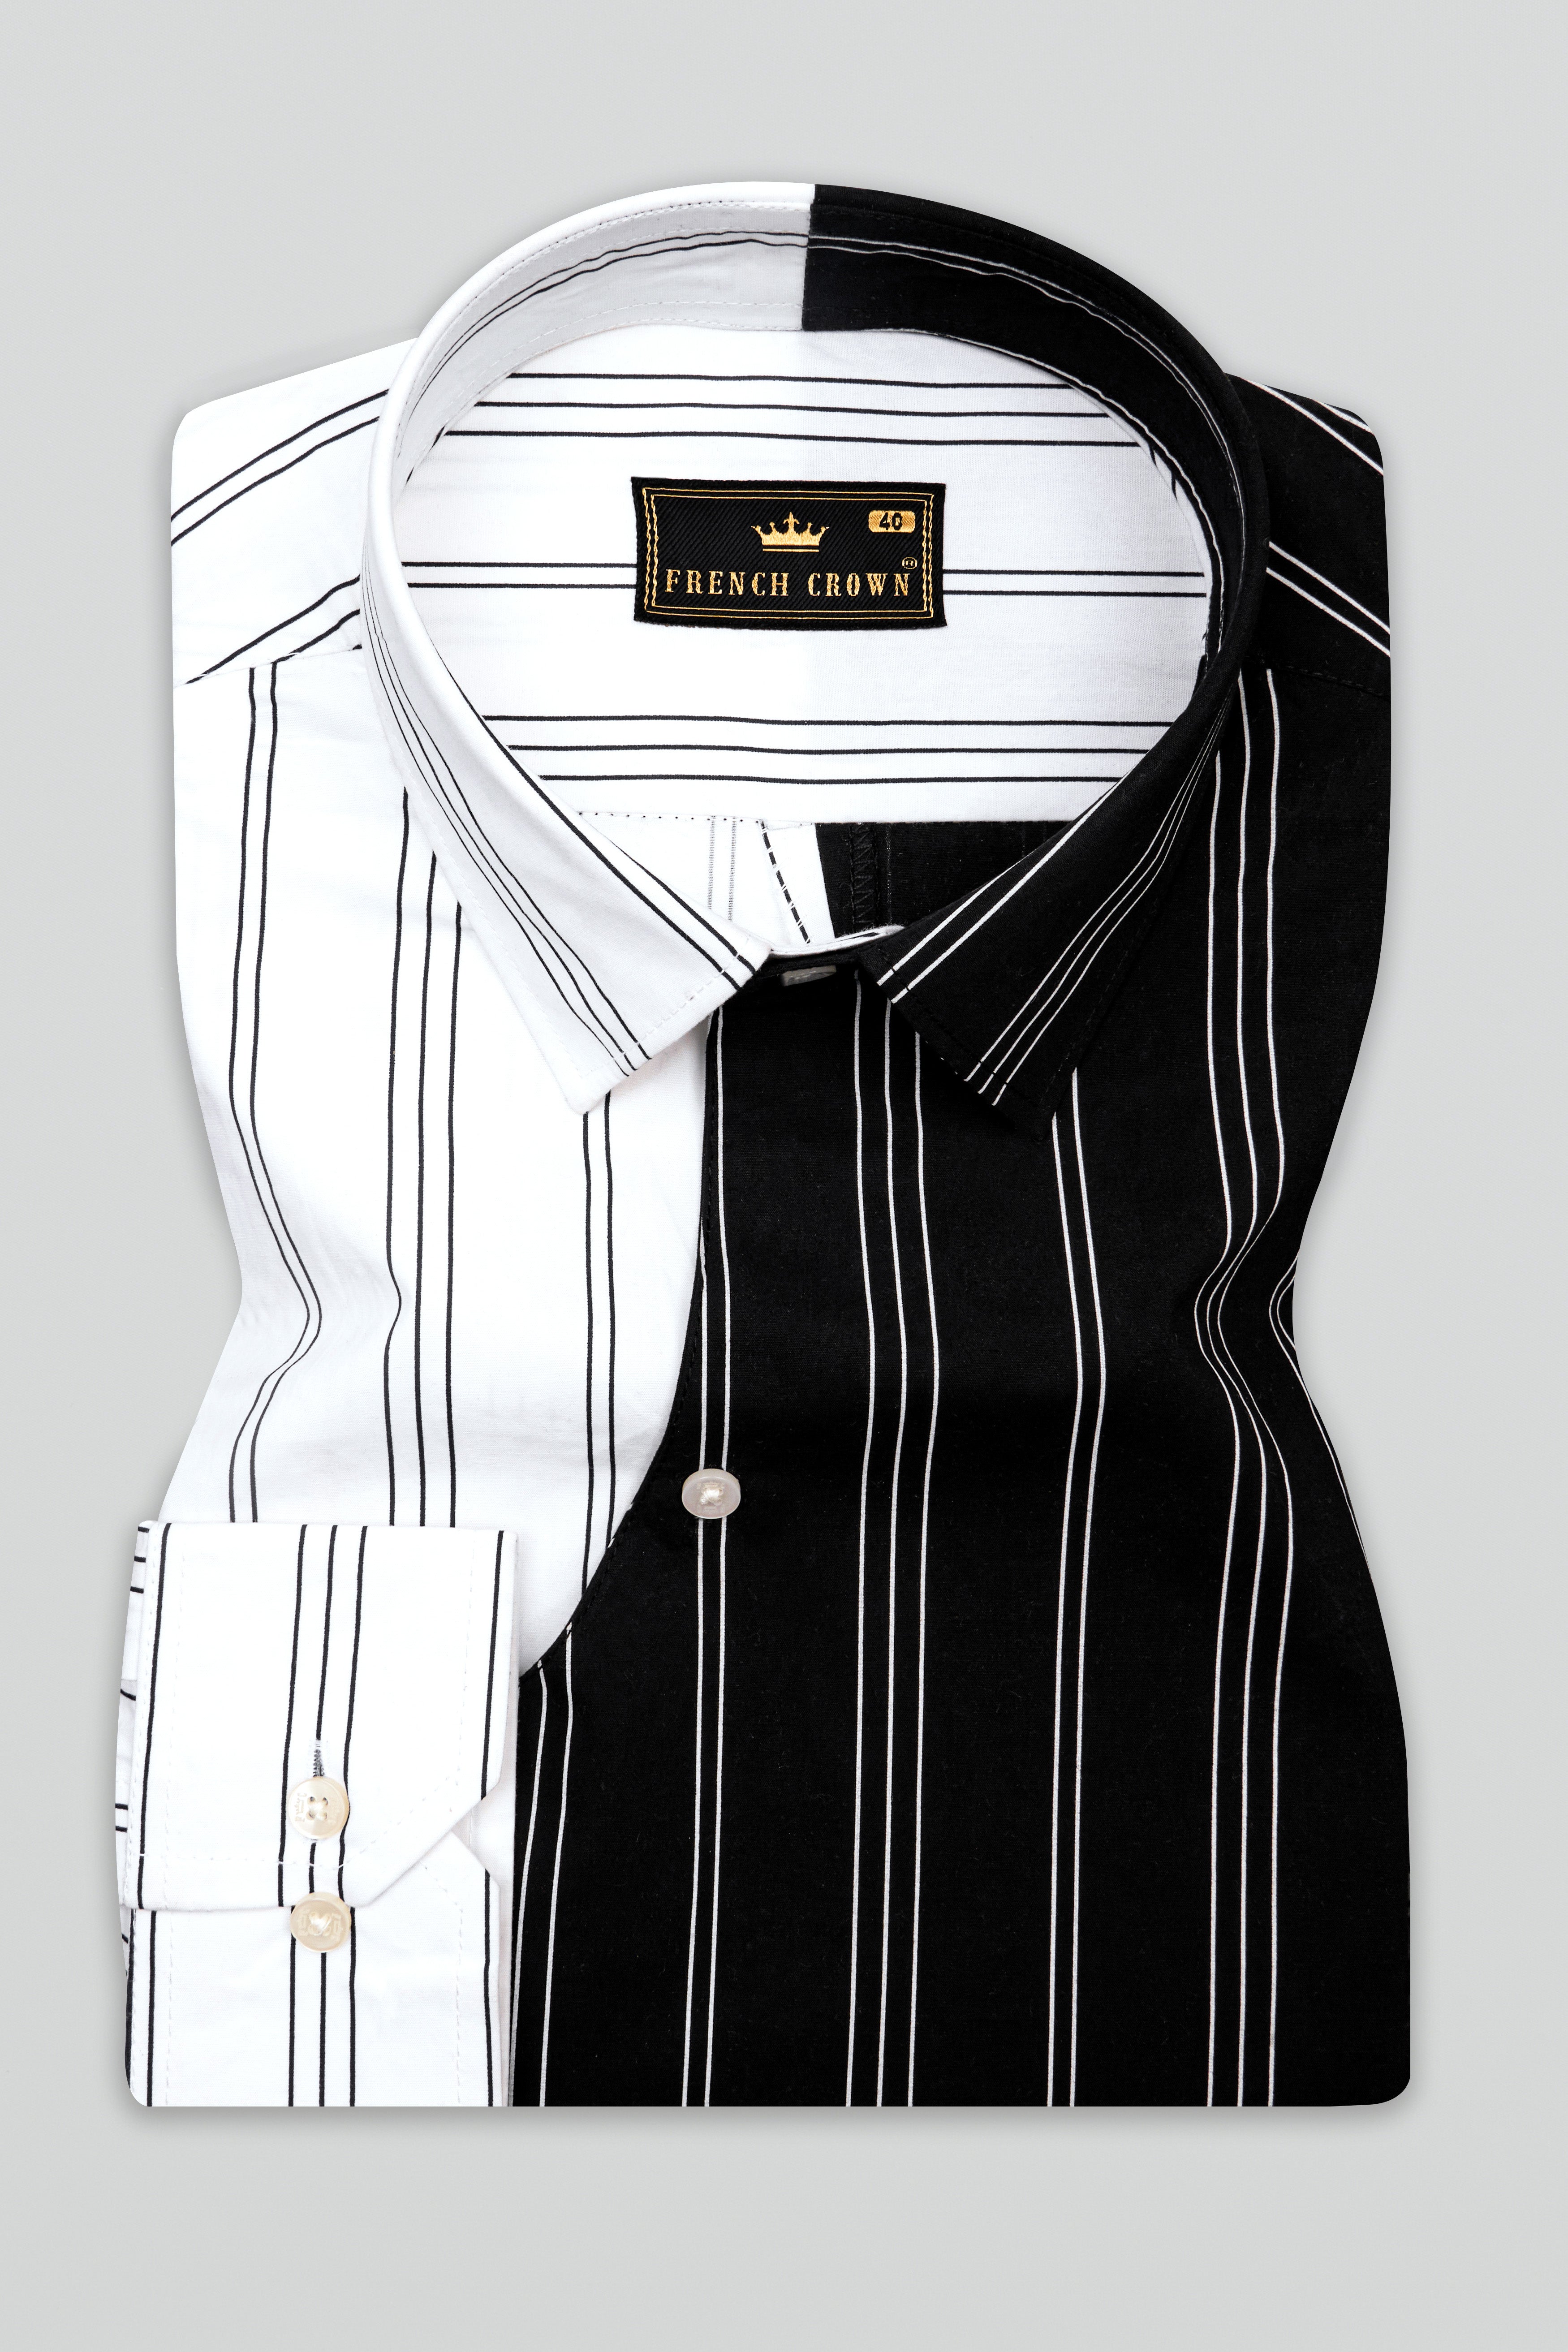 Half Withe with Half Black Pinstriped  Embellished with Embroidered Work Premium Cotton Designer Shirt